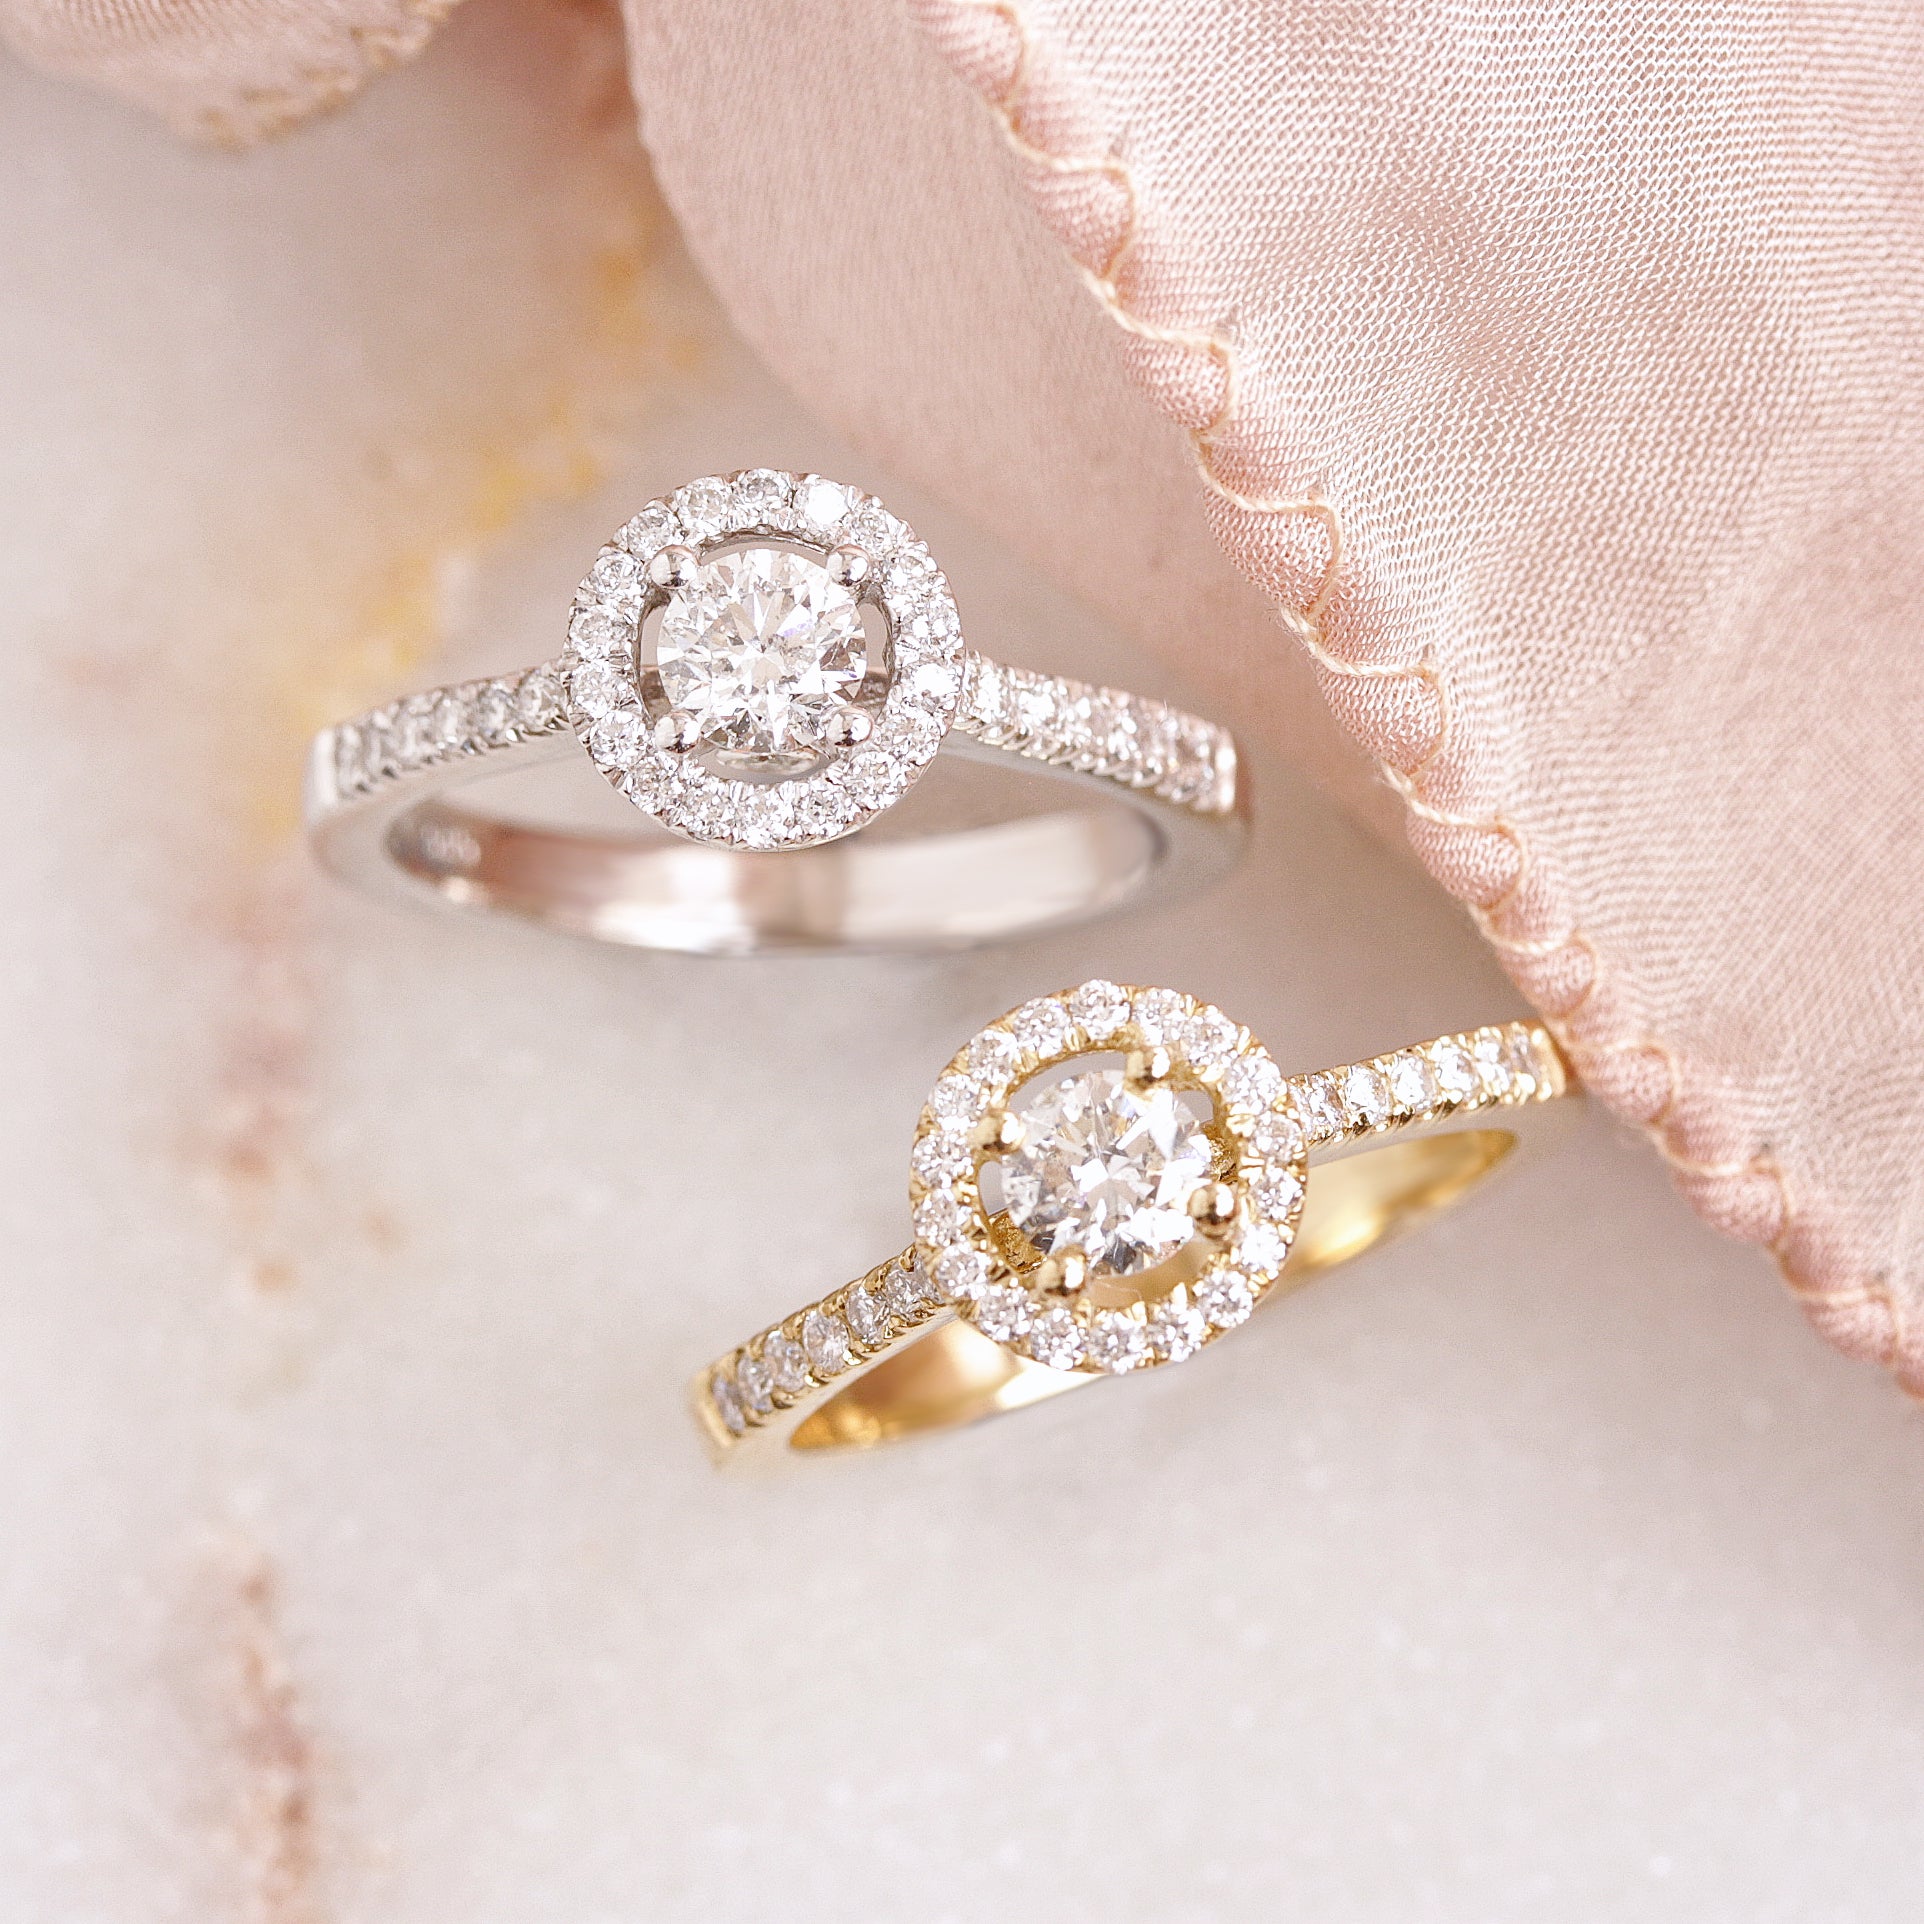 Simple Engagement Rings with Lab Diamonds in Minimalist Style